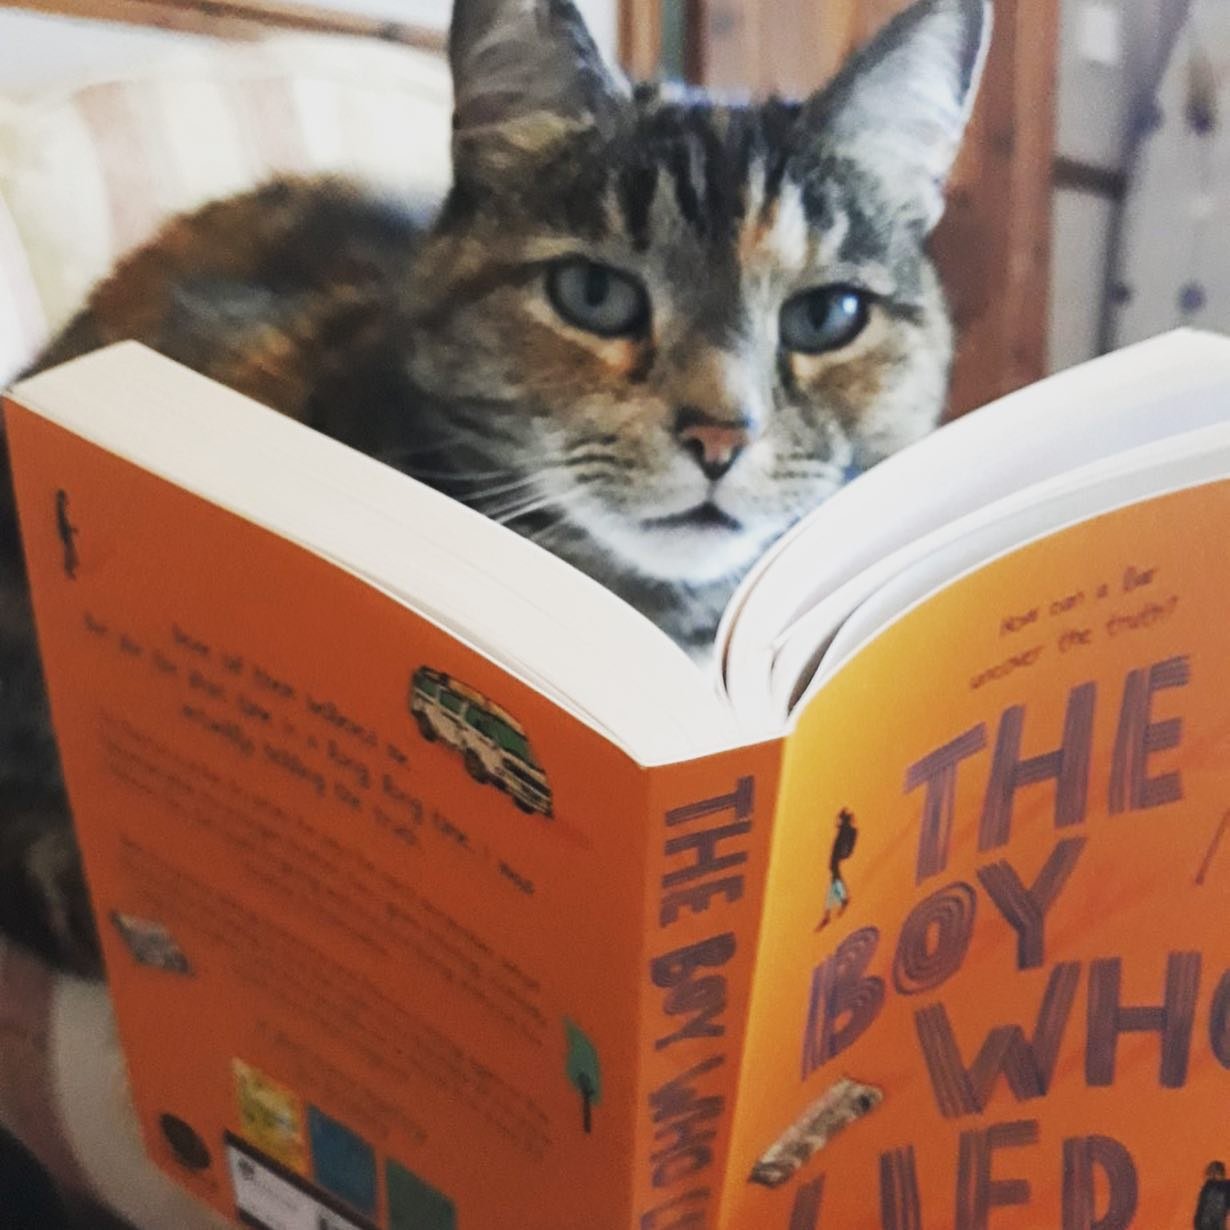 LOVE these #BigCityReads pics! There&rsquo;s Isabel from Arnold Hill Academy and Brambles the cat 😍All kinds of readers are picking up THE BOY WHO LIED! #nottingham #nottmcityoflit